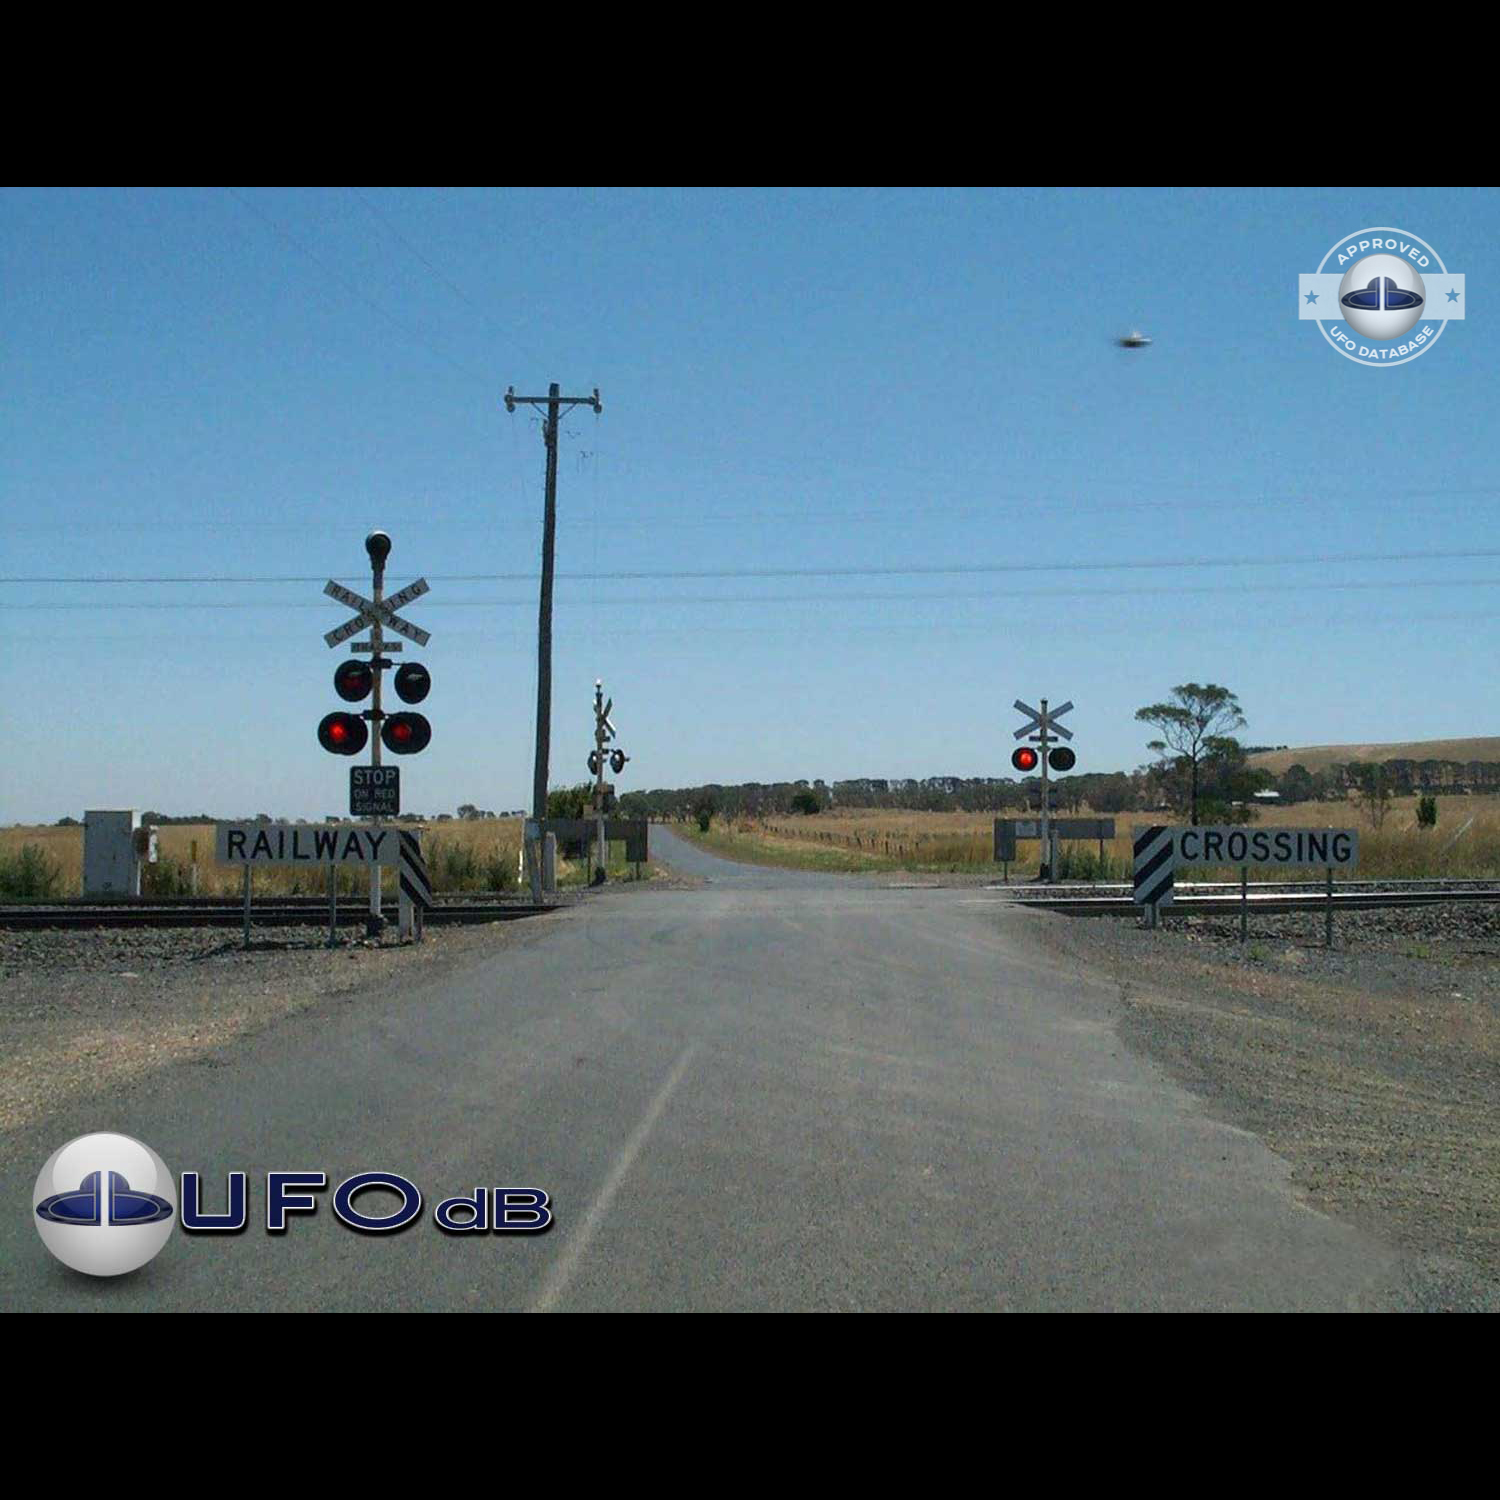 UFO picture showing UFO flying near railroad crossing UFO Picture #47-1